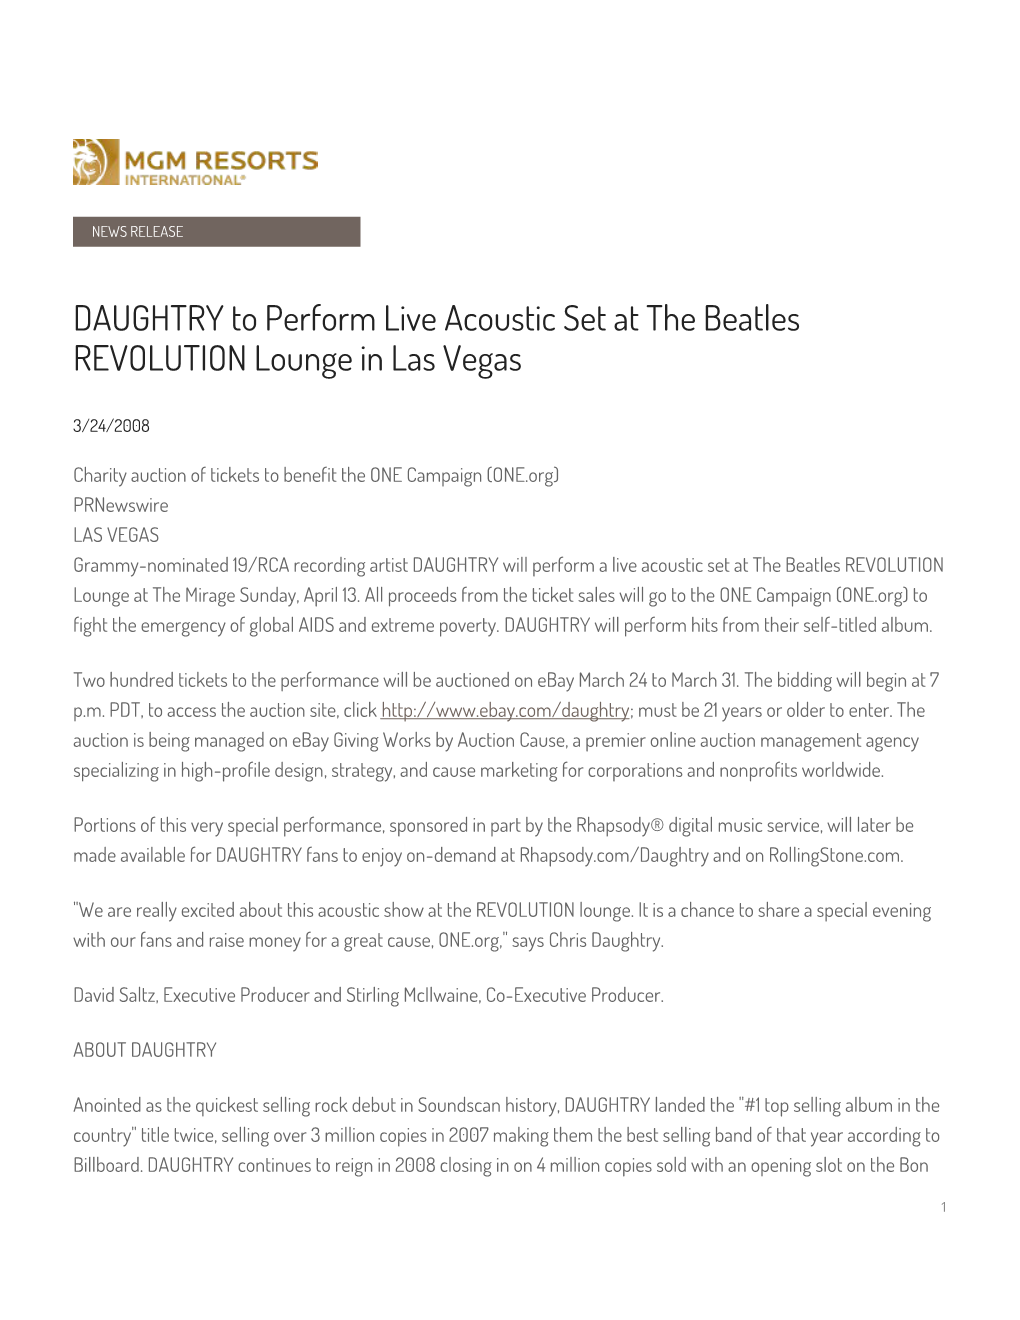 DAUGHTRY to Perform Live Acoustic Set at the Beatles REVOLUTION Lounge in Las Vegas